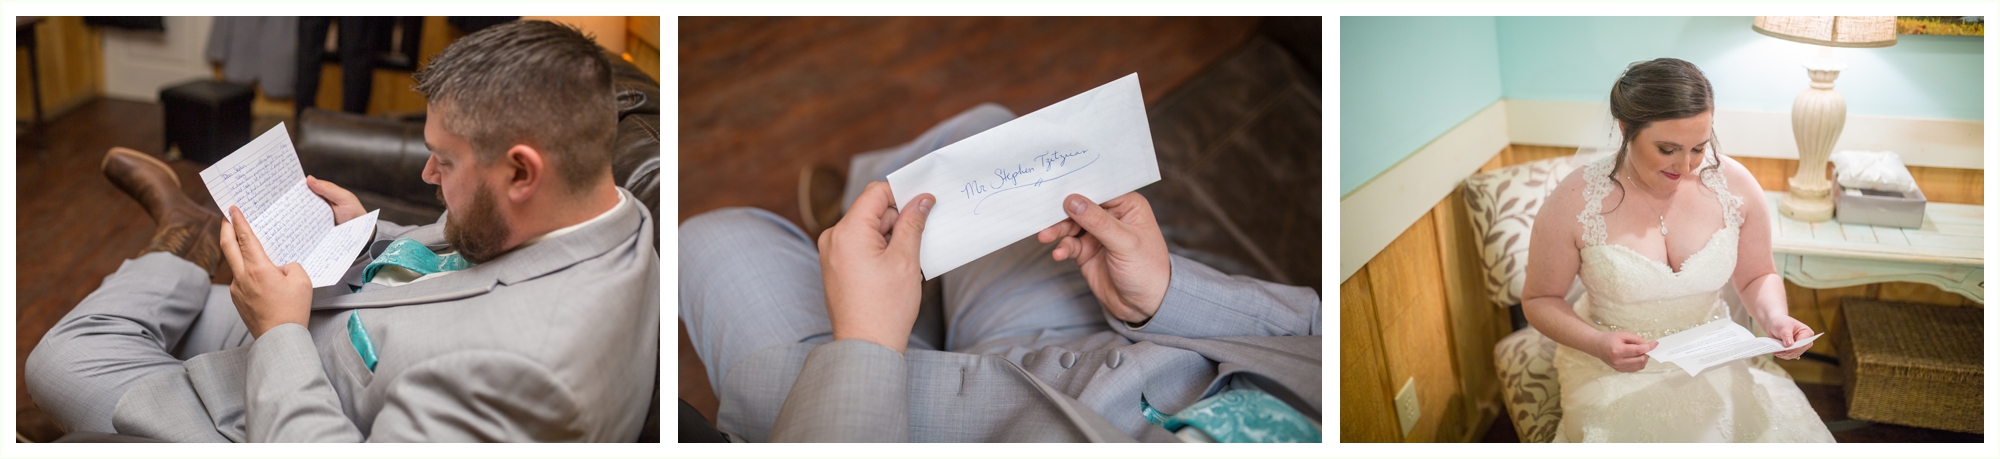 bride and groom share letters before wedding ceremony